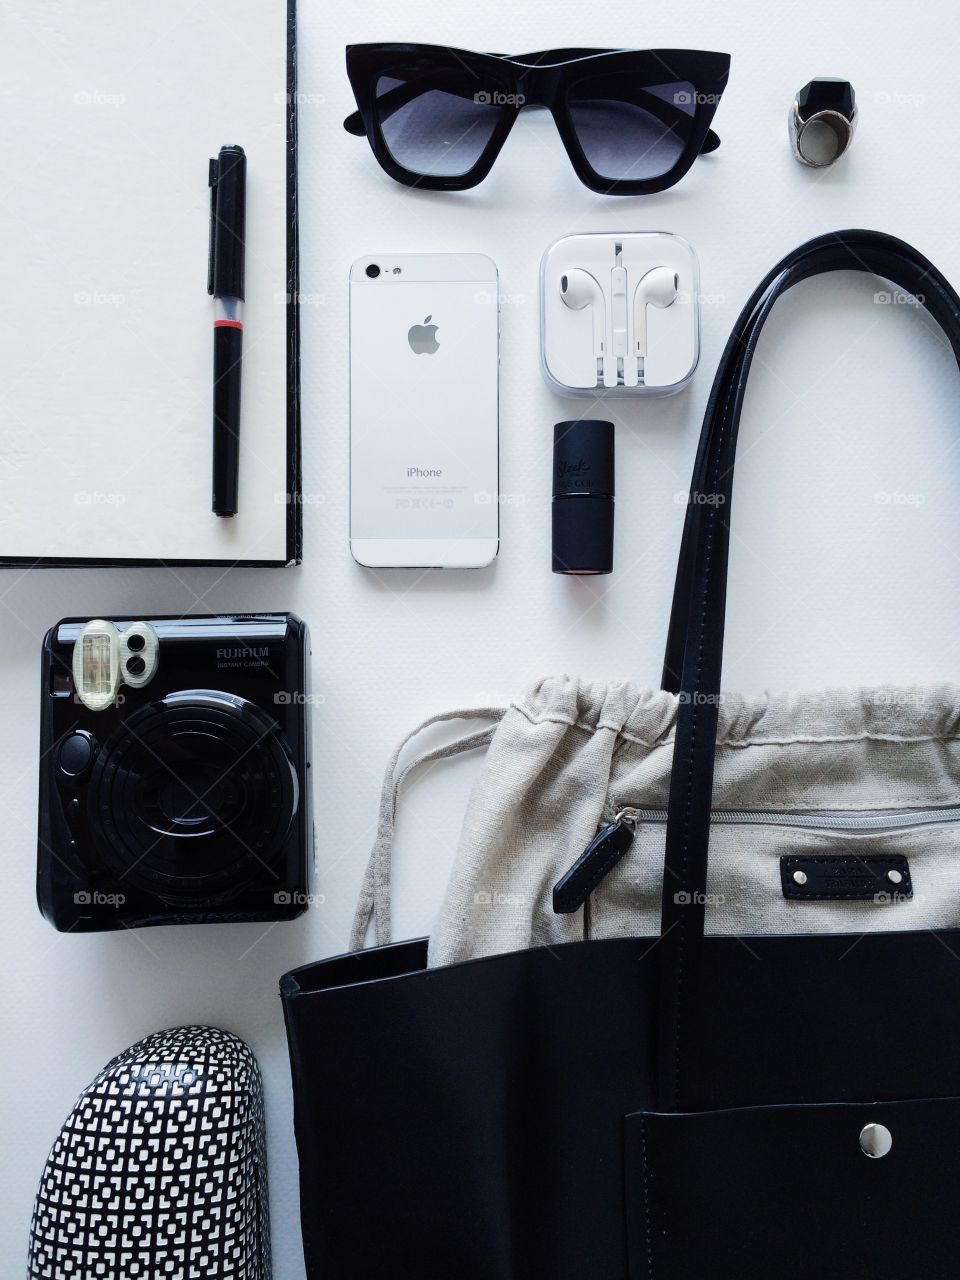 Black and white stuff . What's in your bag?
In my bag with black and white items in daily life